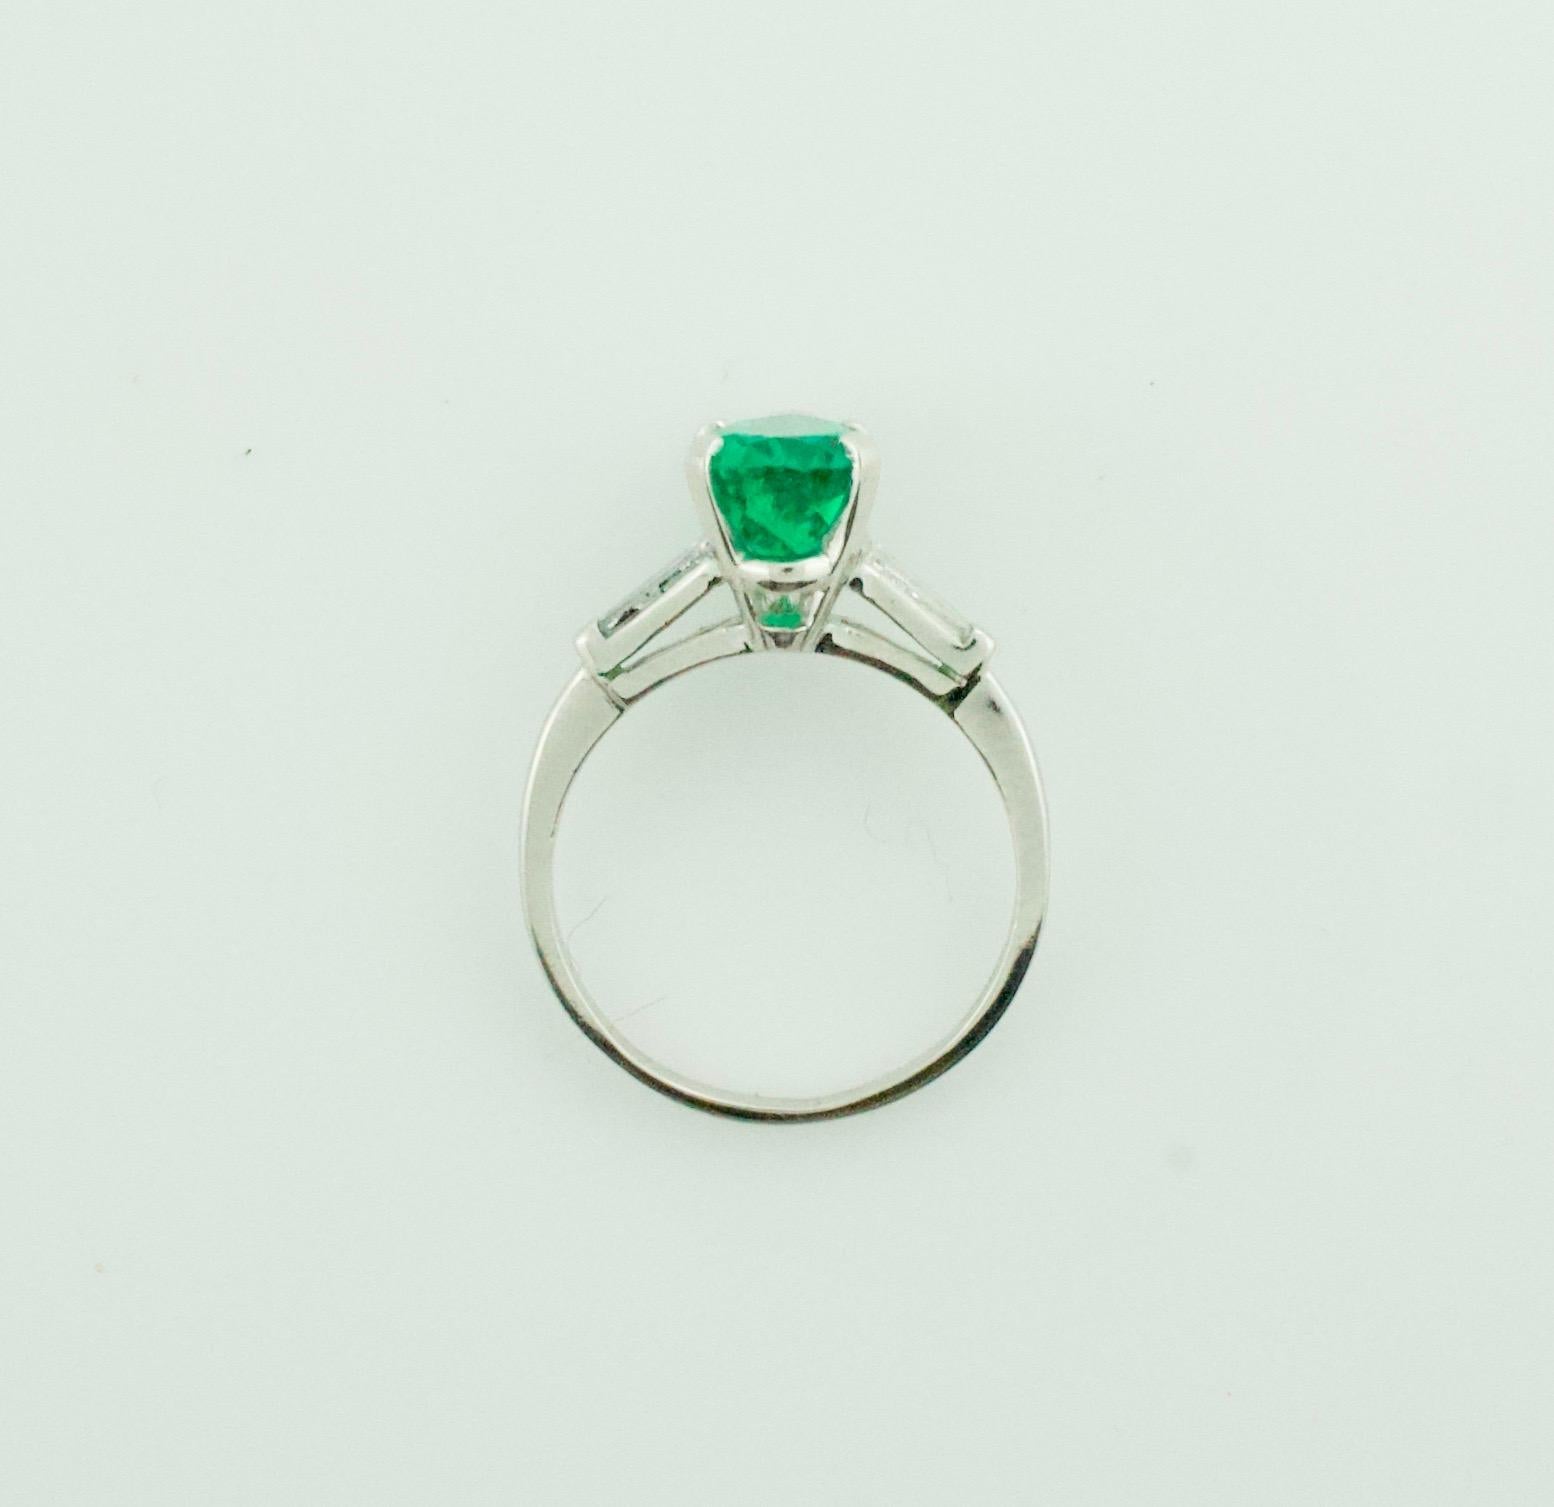 Emerald and Diamond Classic Solitaire Ring in Platinum
Elevate your style with this exquisite Emerald and Diamond Classic Solitaire Ring in Platinum. This stunning ring features a pear-shaped Colombian Emerald with a weight of 1.87 carats, certified